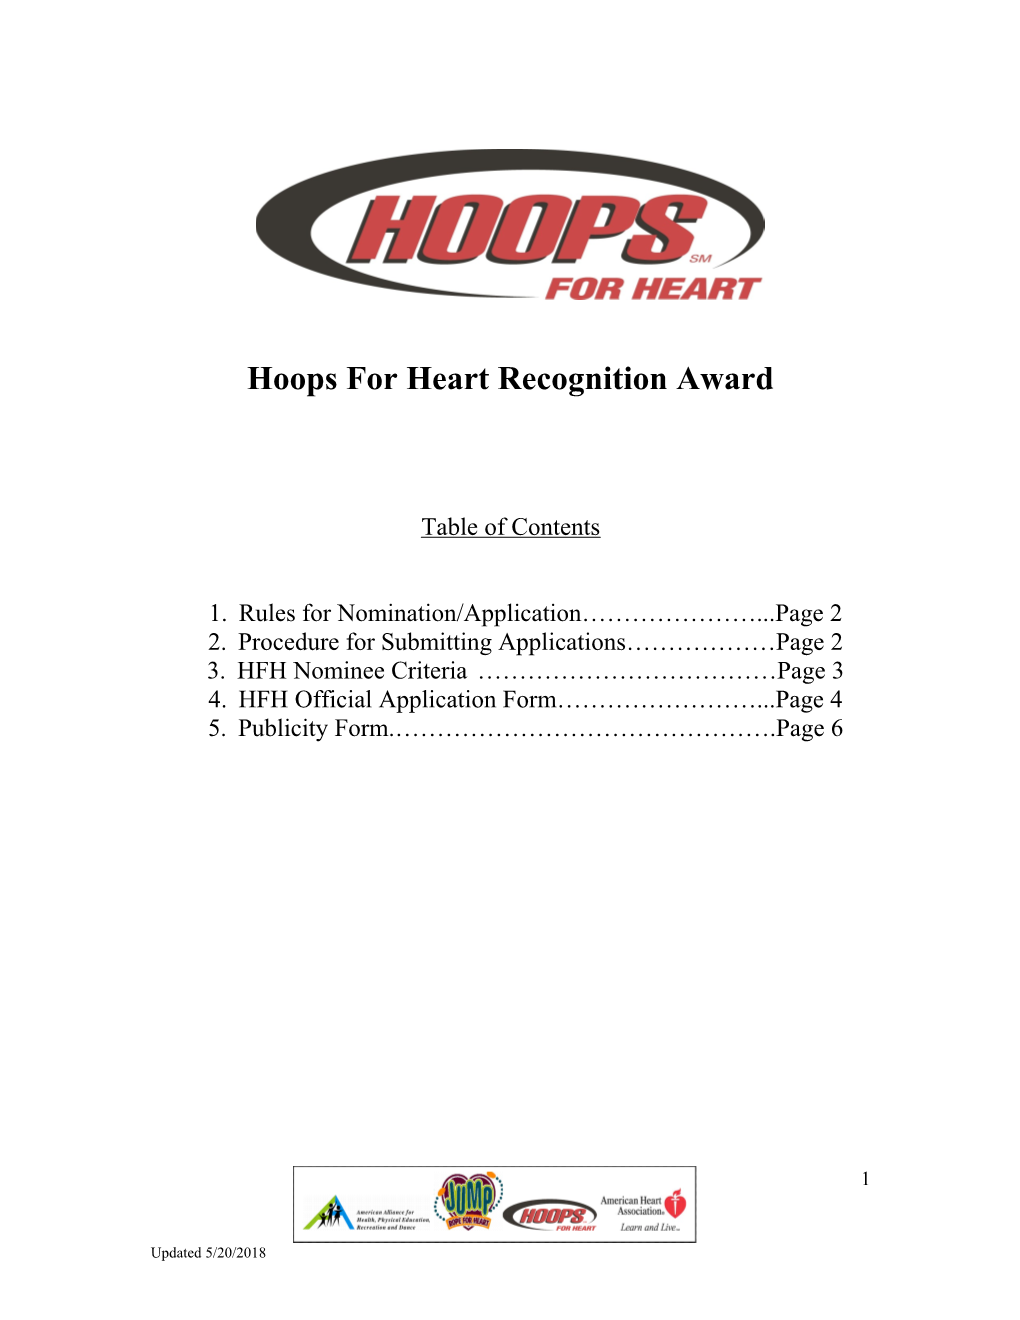 Jump Rope for Heart and Hoops for Heart Recognition Awards